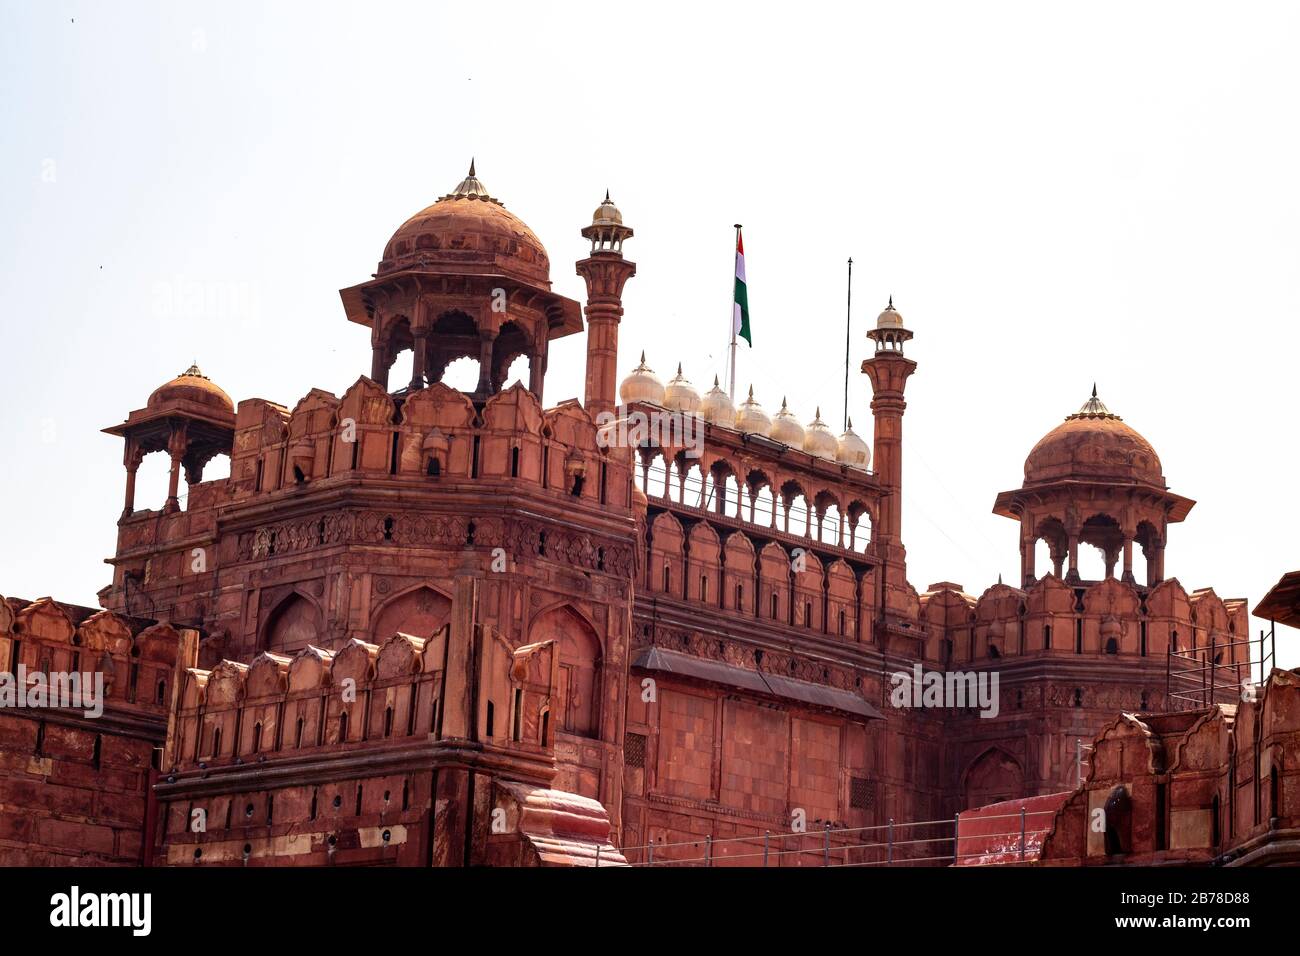 Lal Qila - Red Fort in Delhi, India Constructed in 1648 by the fifth Mughal Emperor Shah Jahan Stock Photo